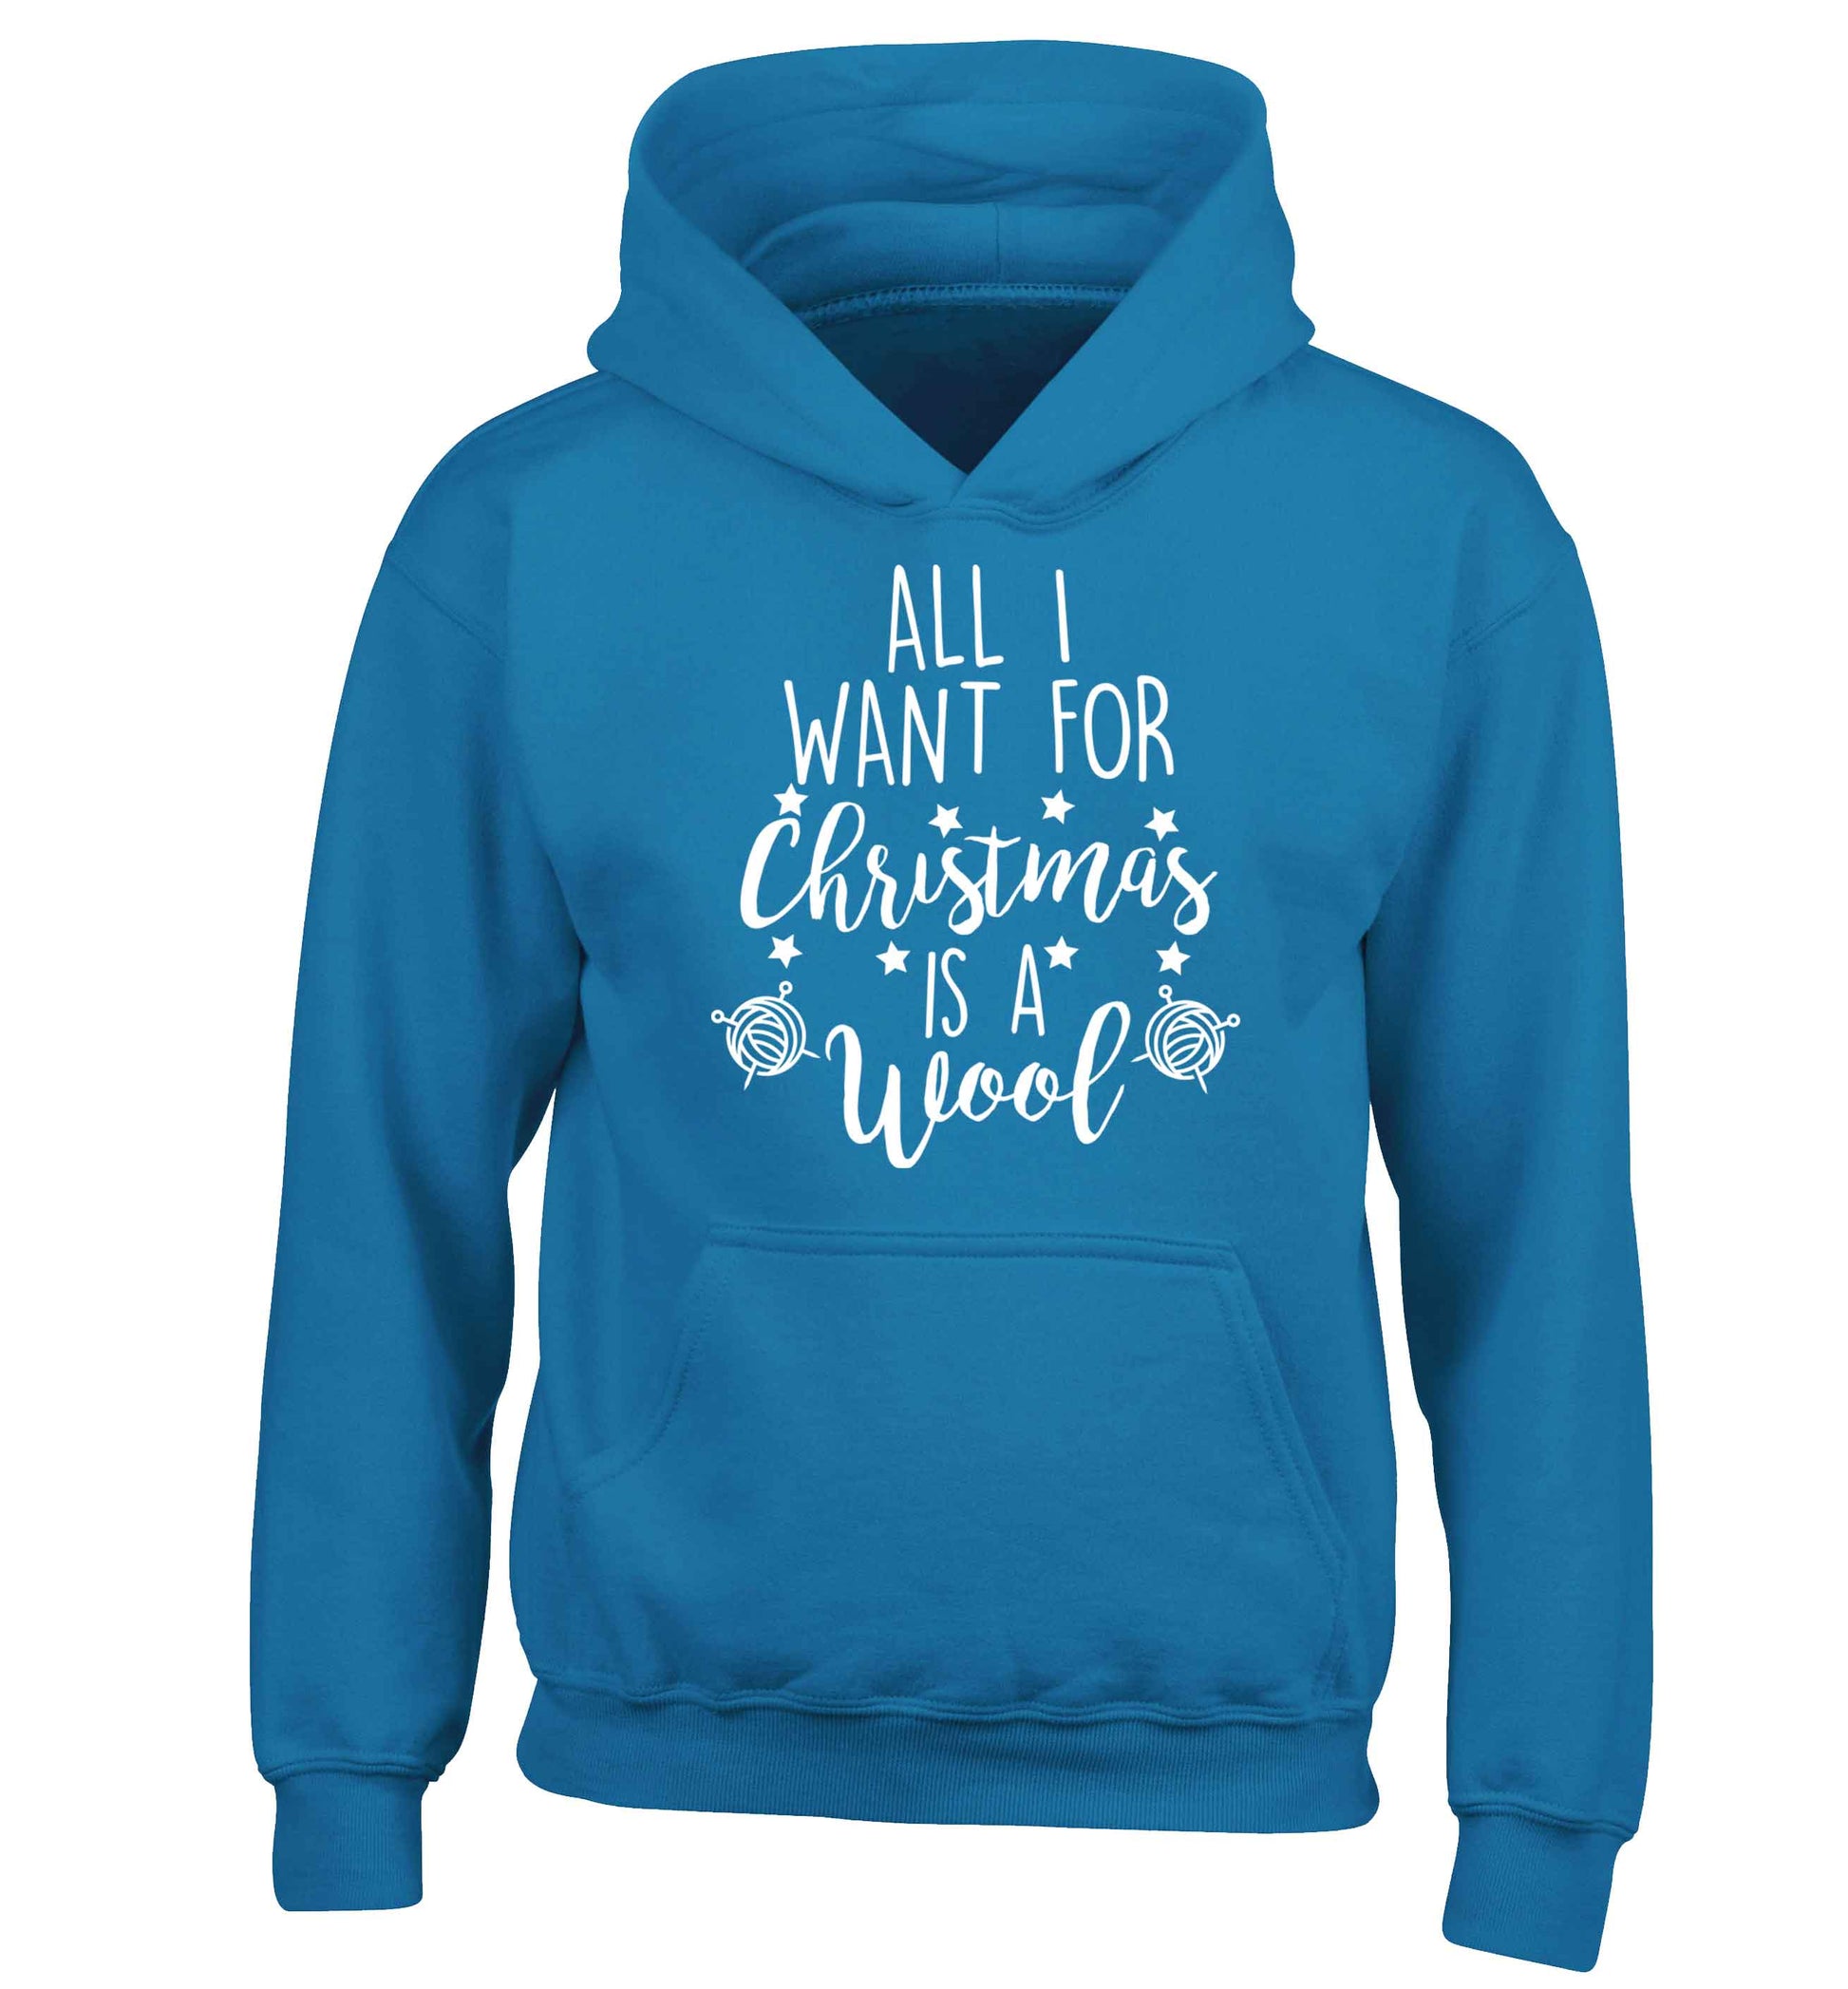 All I want for Christmas is wool! children's blue hoodie 12-13 Years